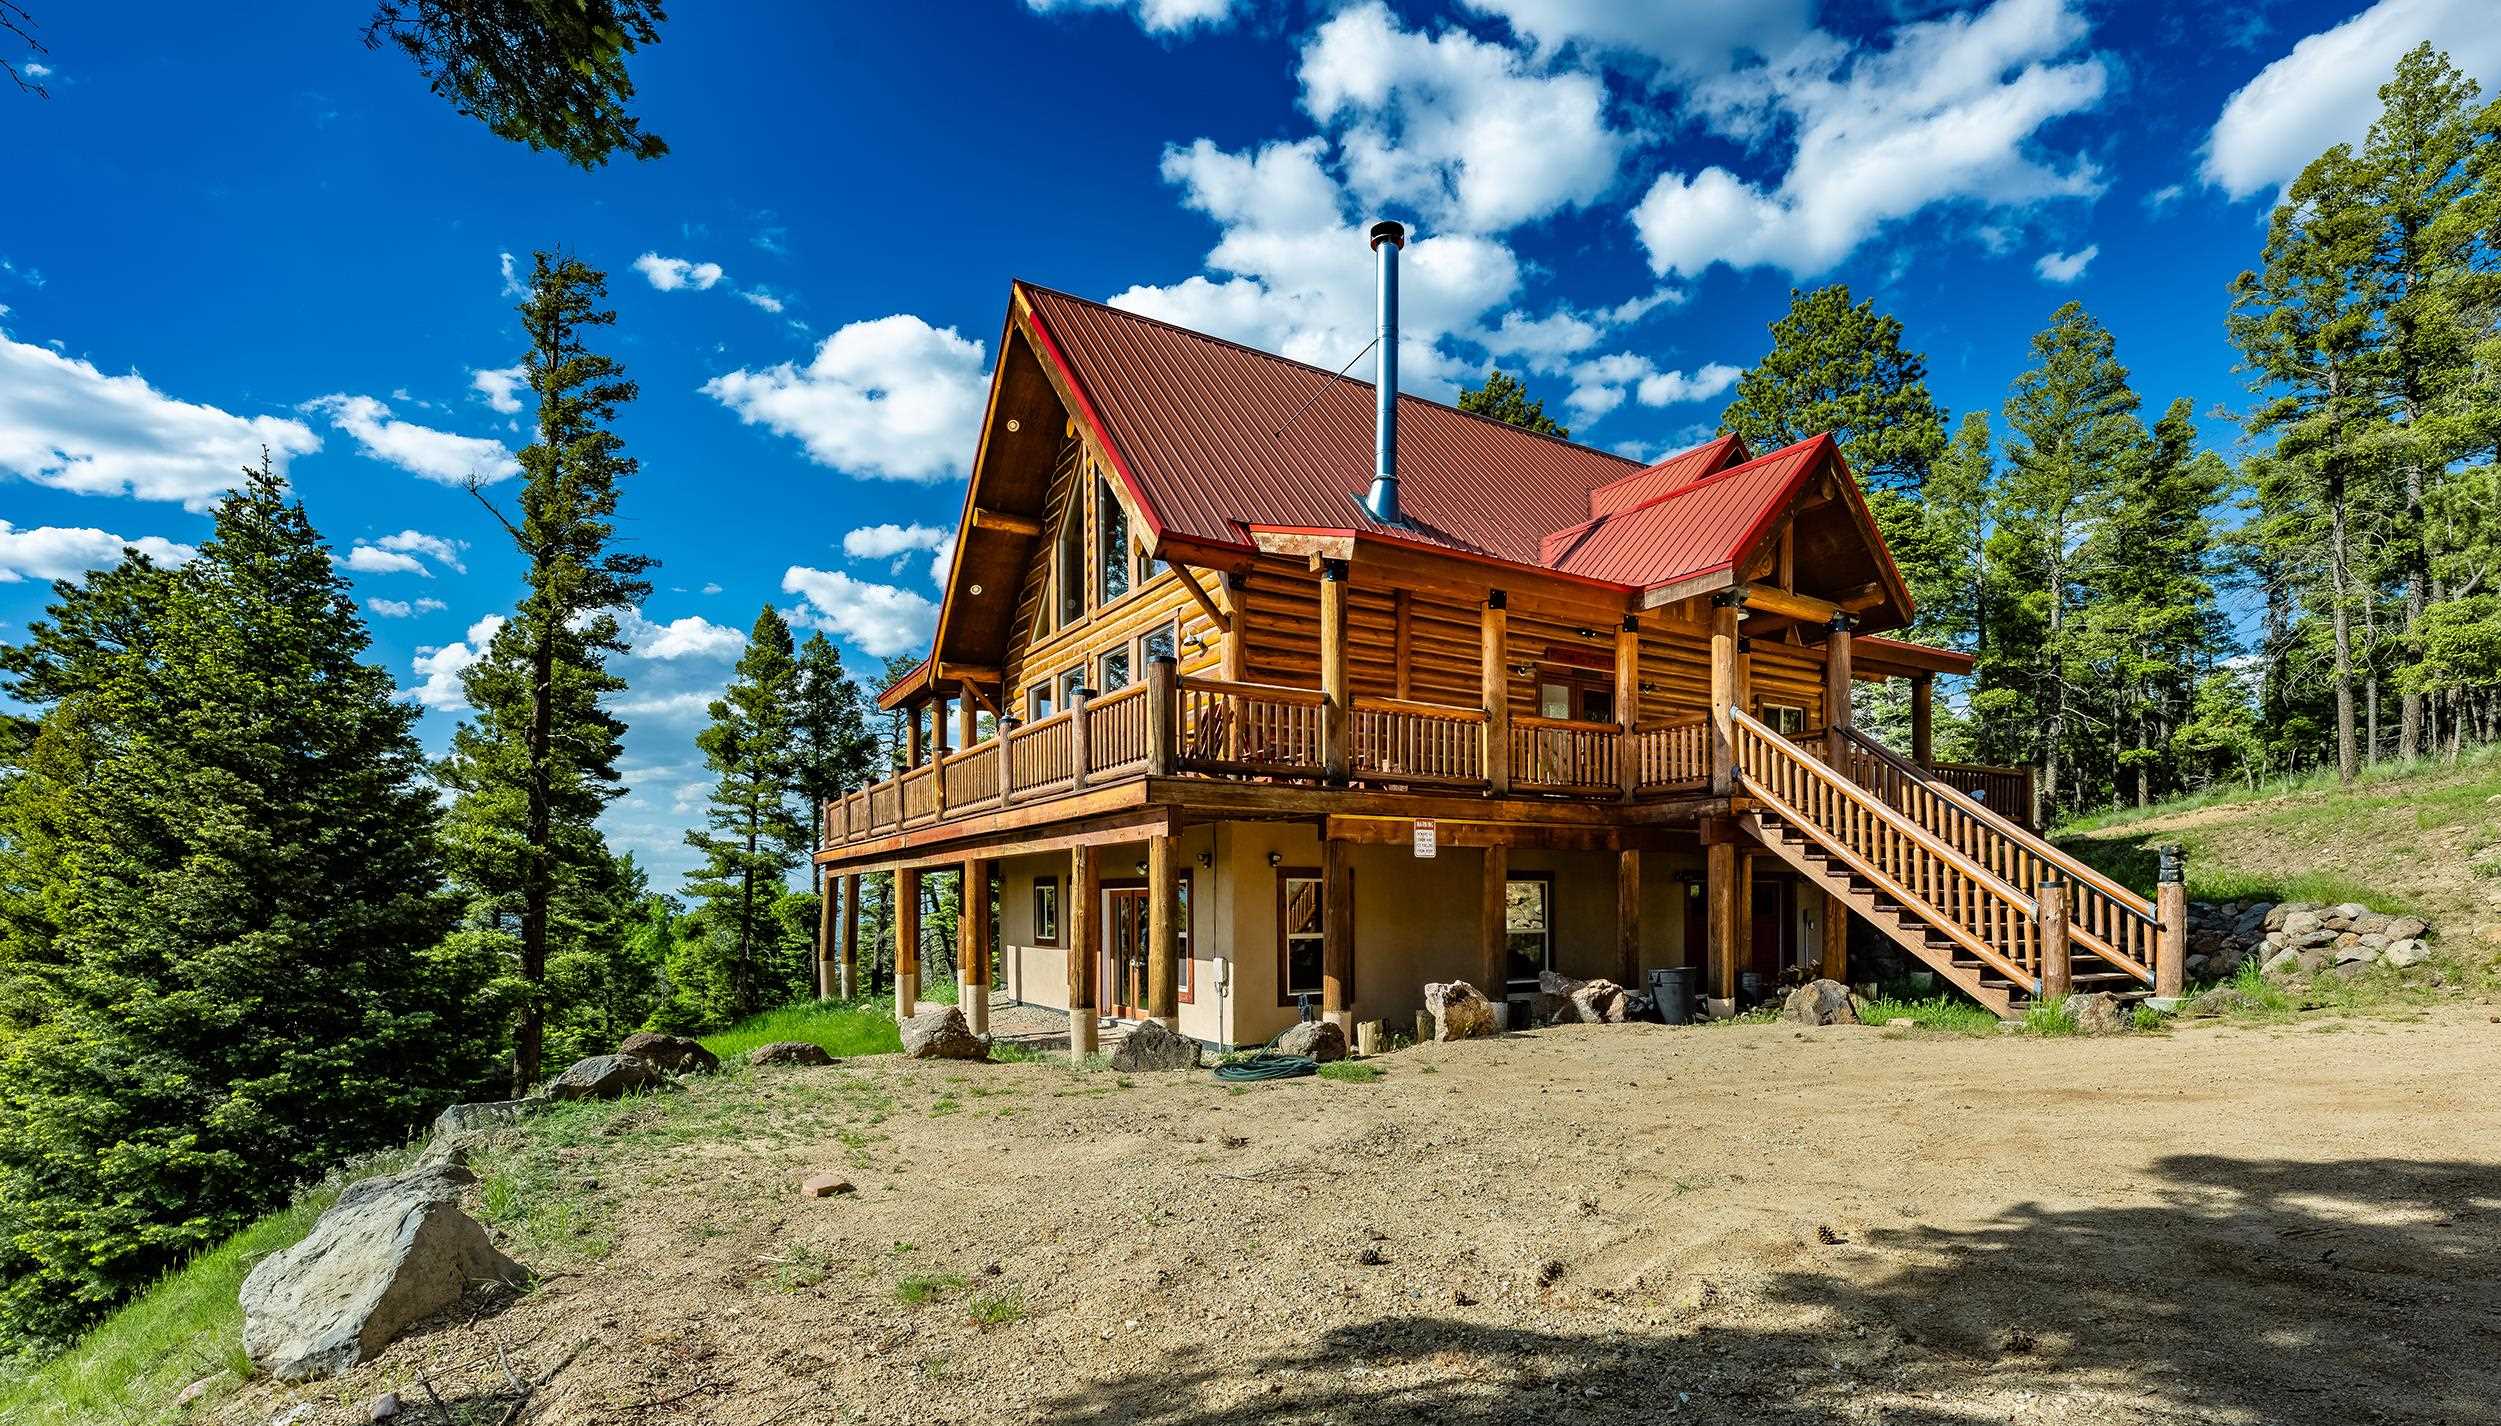 SKI IN/SKI Out Dream Home ! Imagine yourself sitting in the hot tub watching skiers come by through the trees and enjoying an apres ski hot toddy. Life is good in this mountain home just steps off the ski area.  One of the closest ski in/ski out houses to the Angel Fire Ski Area. The home sits on approx 1.92 acres and has amaizing views off the southwest side of the property and views of ski run on the northern side.  5 bedrooms, 4.5 baths with two living areas, two full kitchens as well as two laundry areas. If you are a skier or a Mountain biker it doesn't get much better than this.  Potential for rental is high. Angel Fire Resort Amenities package is part of your membership.  You and your immediate family will enjoy ski passes,  country club access, golfing in the Summer and more ( rules and regs apply to membership).